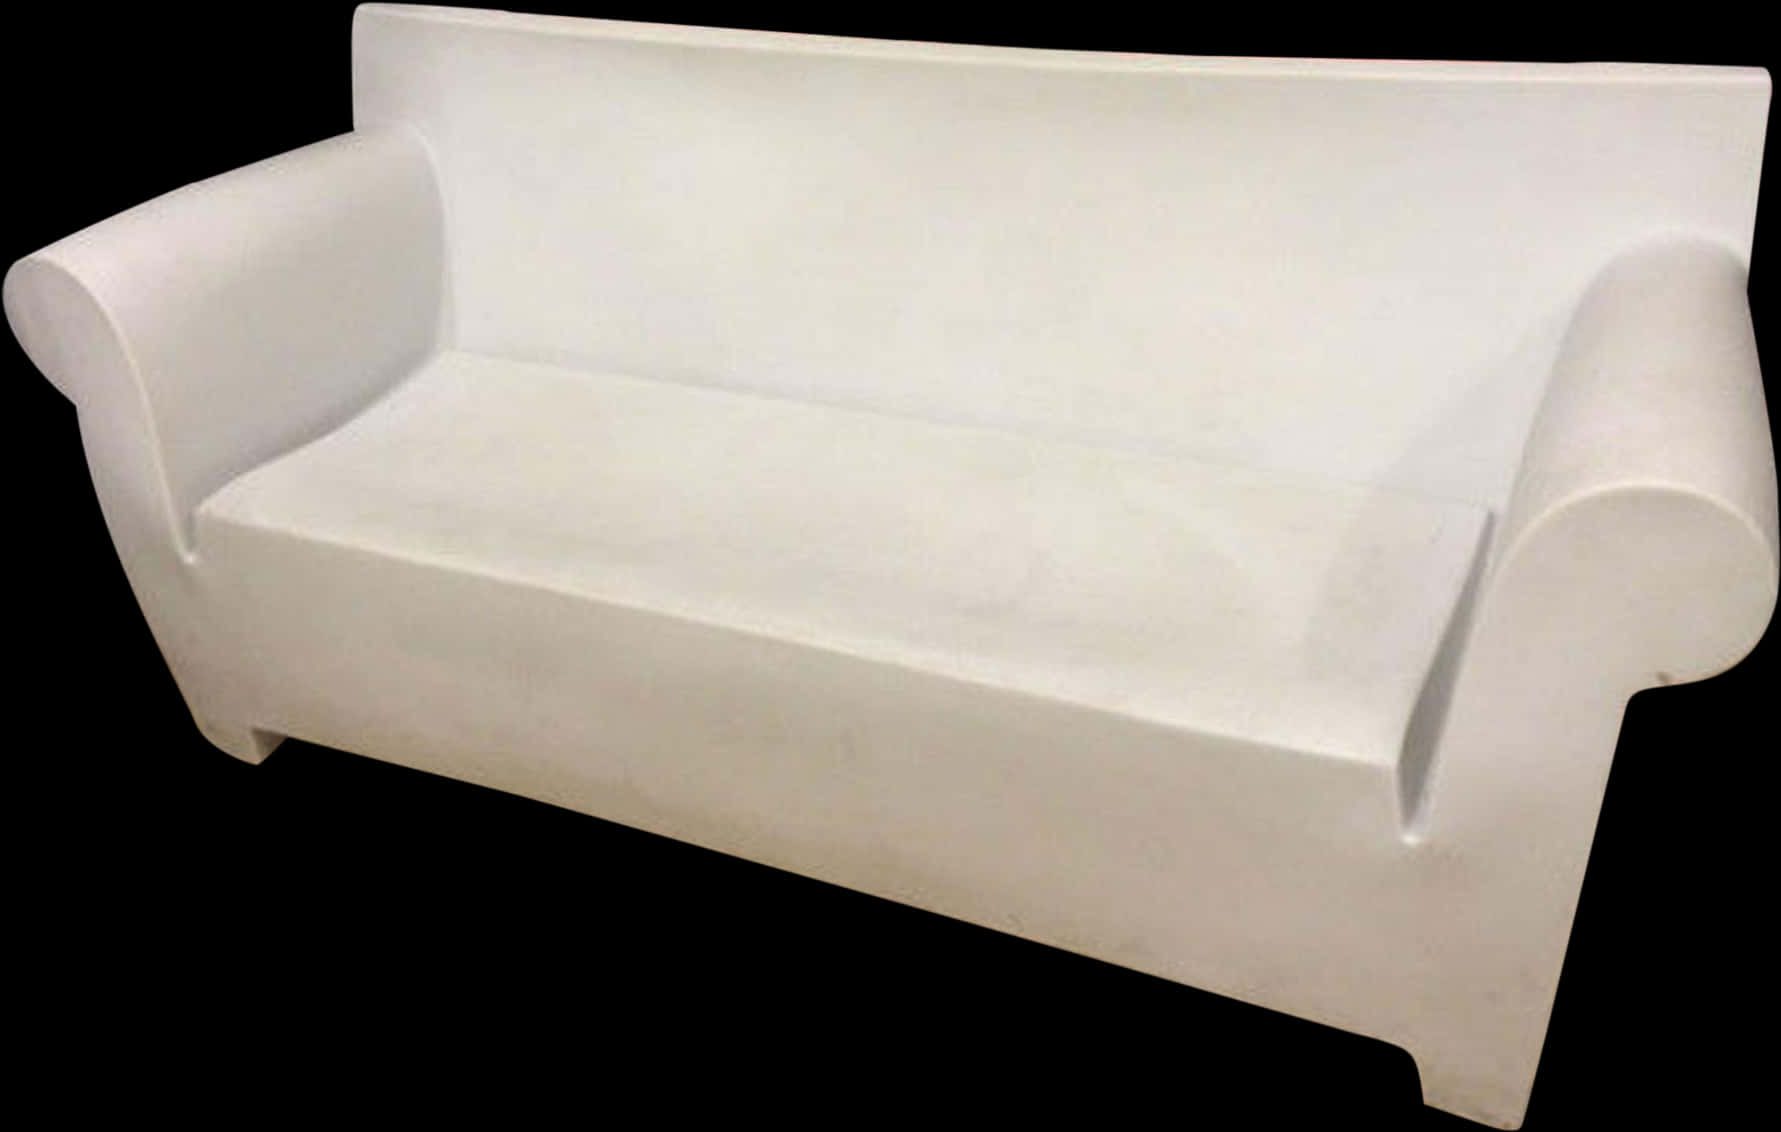 A White Couch On A Black Background